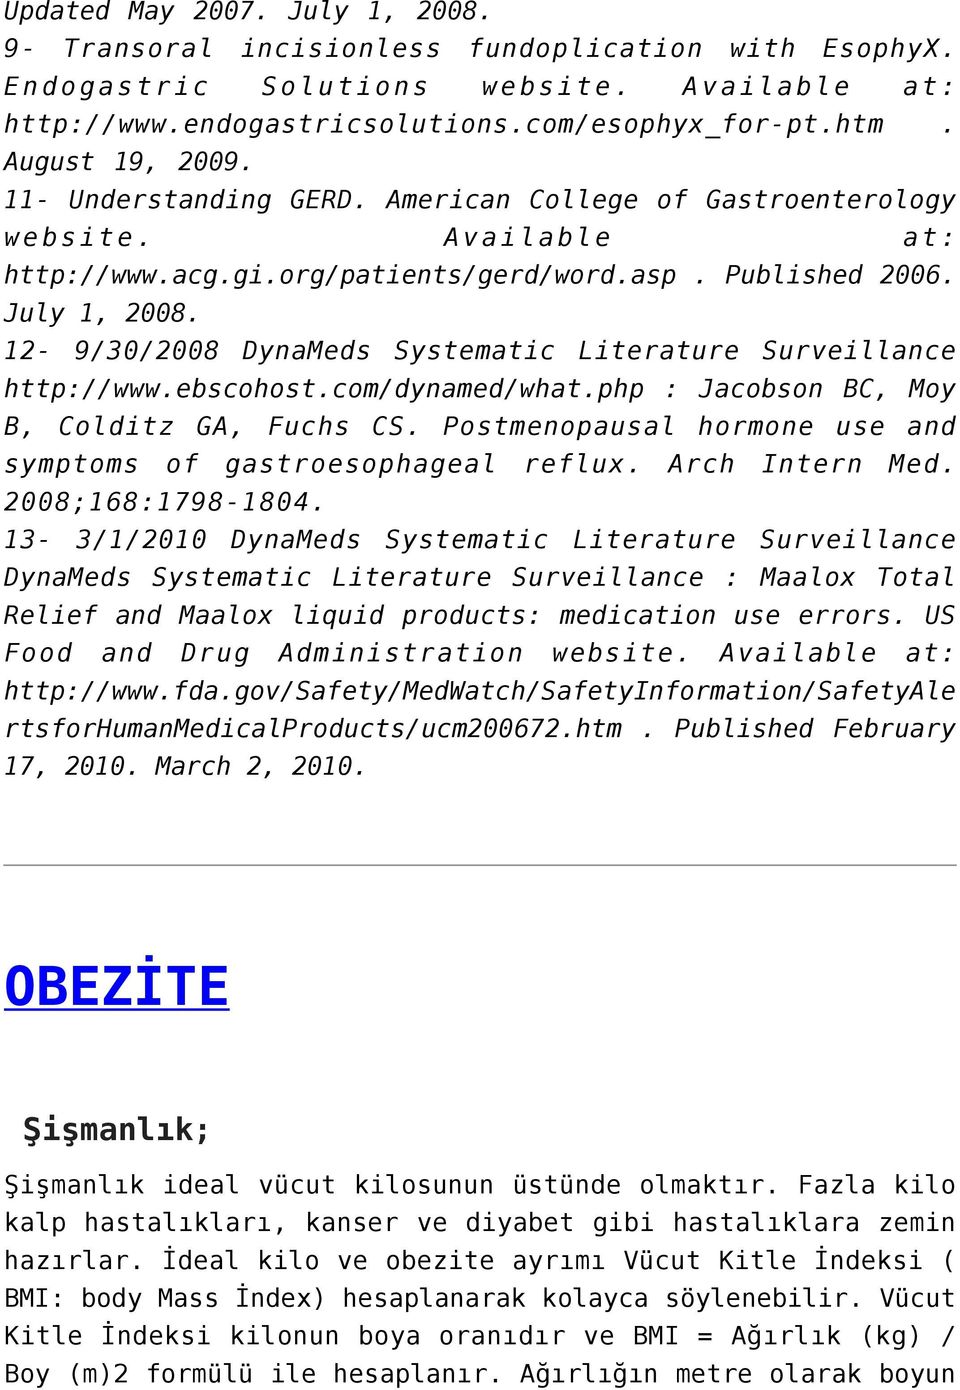 12-9/30/2008 DynaMeds Systematic Literature Surveillance http://www.ebscohost.com/dynamed/what.php : Jacobson BC, Moy B, Colditz GA, Fuchs CS.